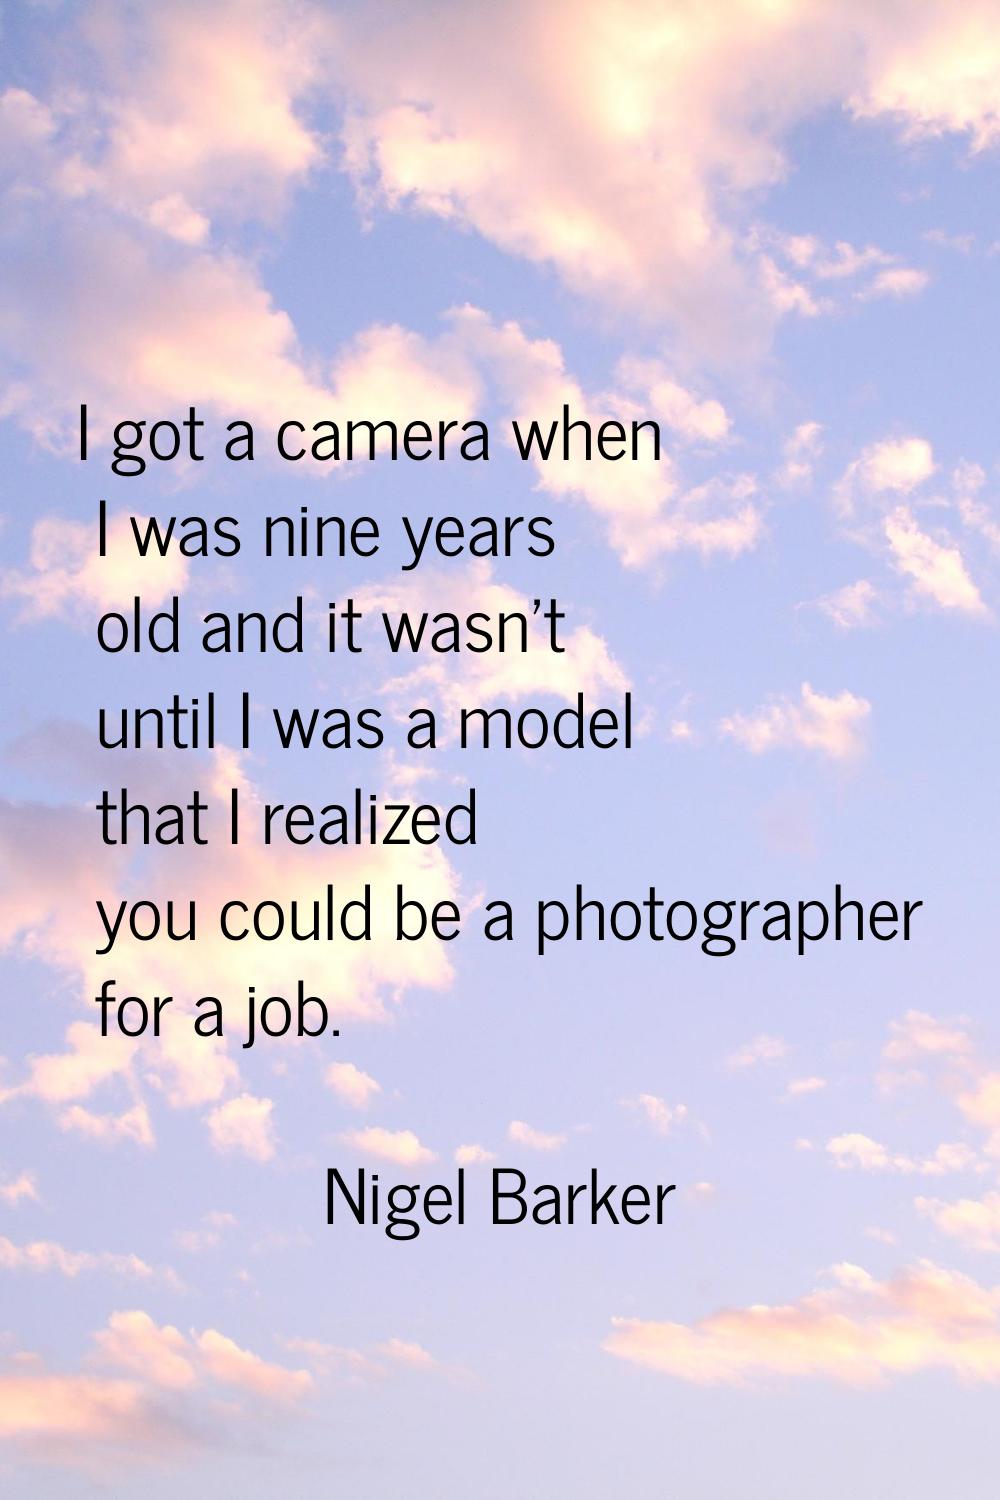 I got a camera when I was nine years old and it wasn't until I was a model that I realized you coul